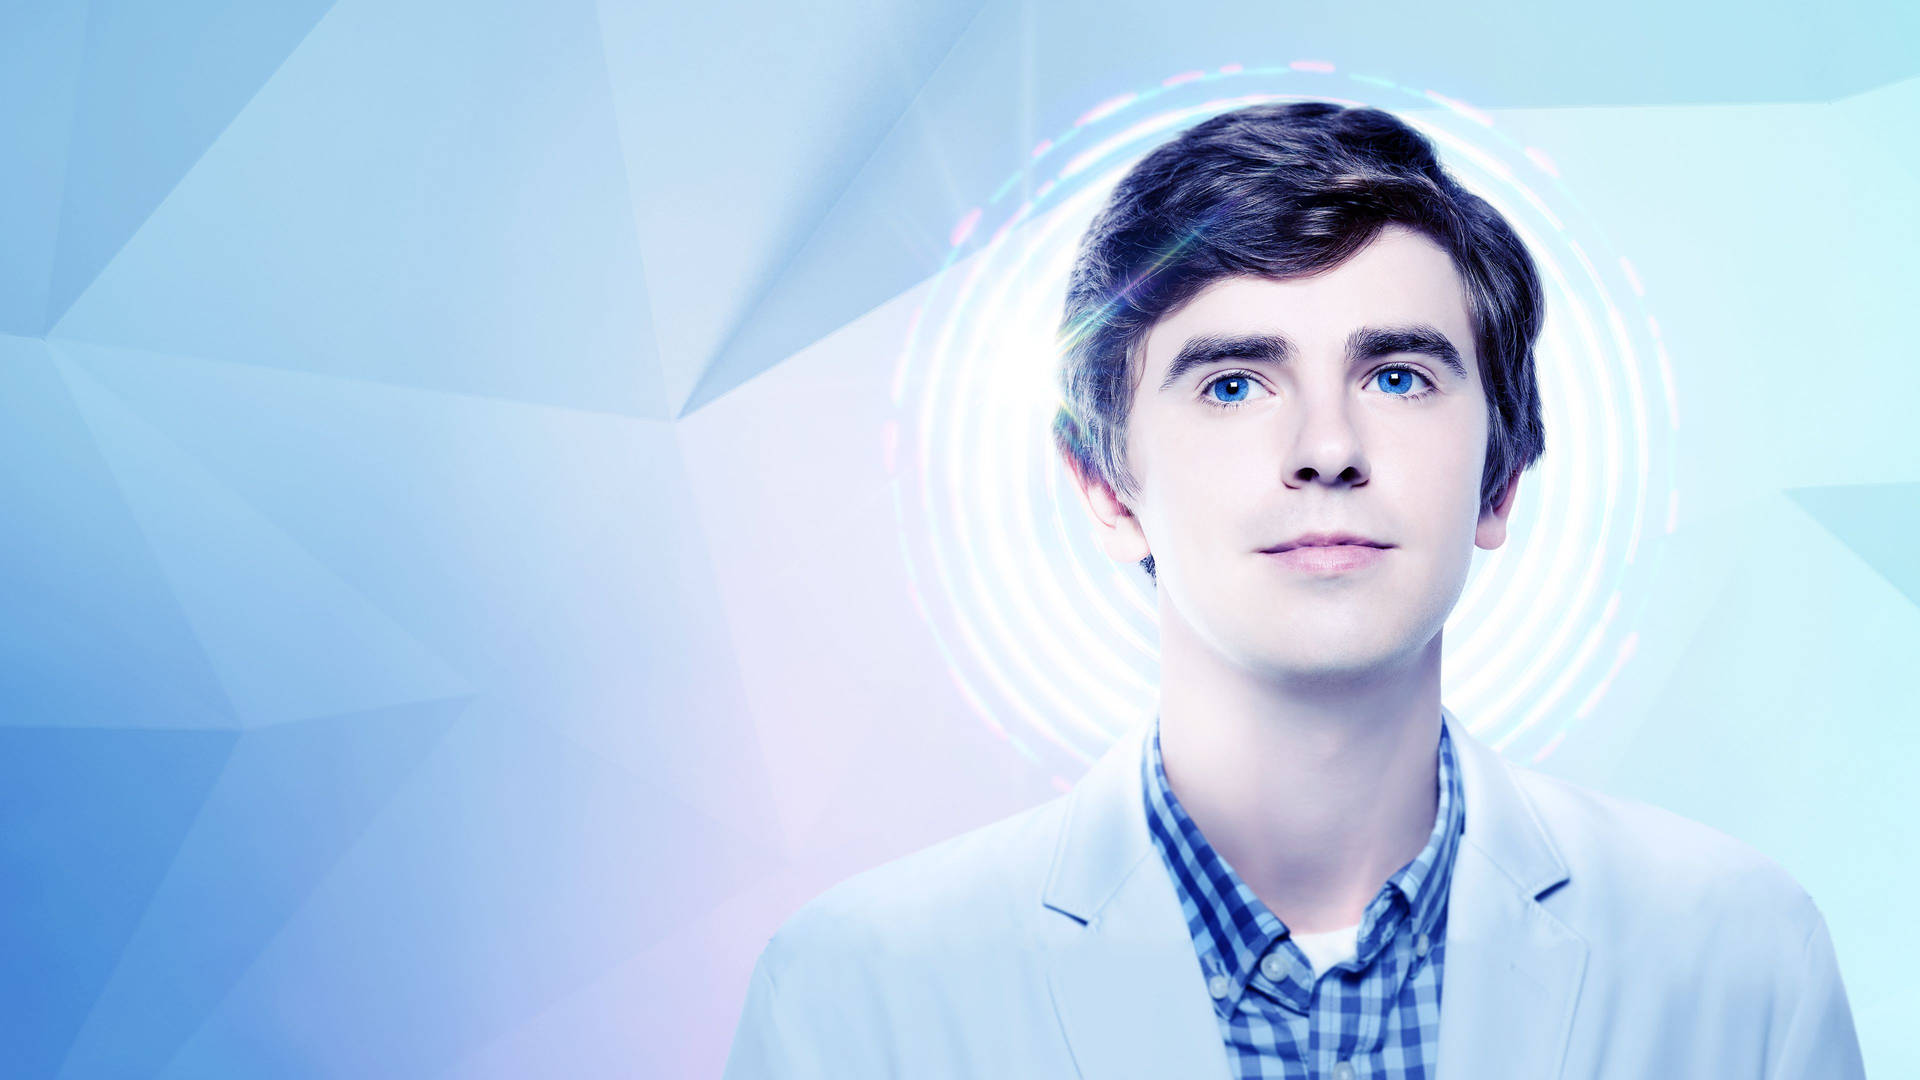 Free The Good Doctor Wallpaper Downloads, [100+] The Good Doctor Wallpapers  for FREE 